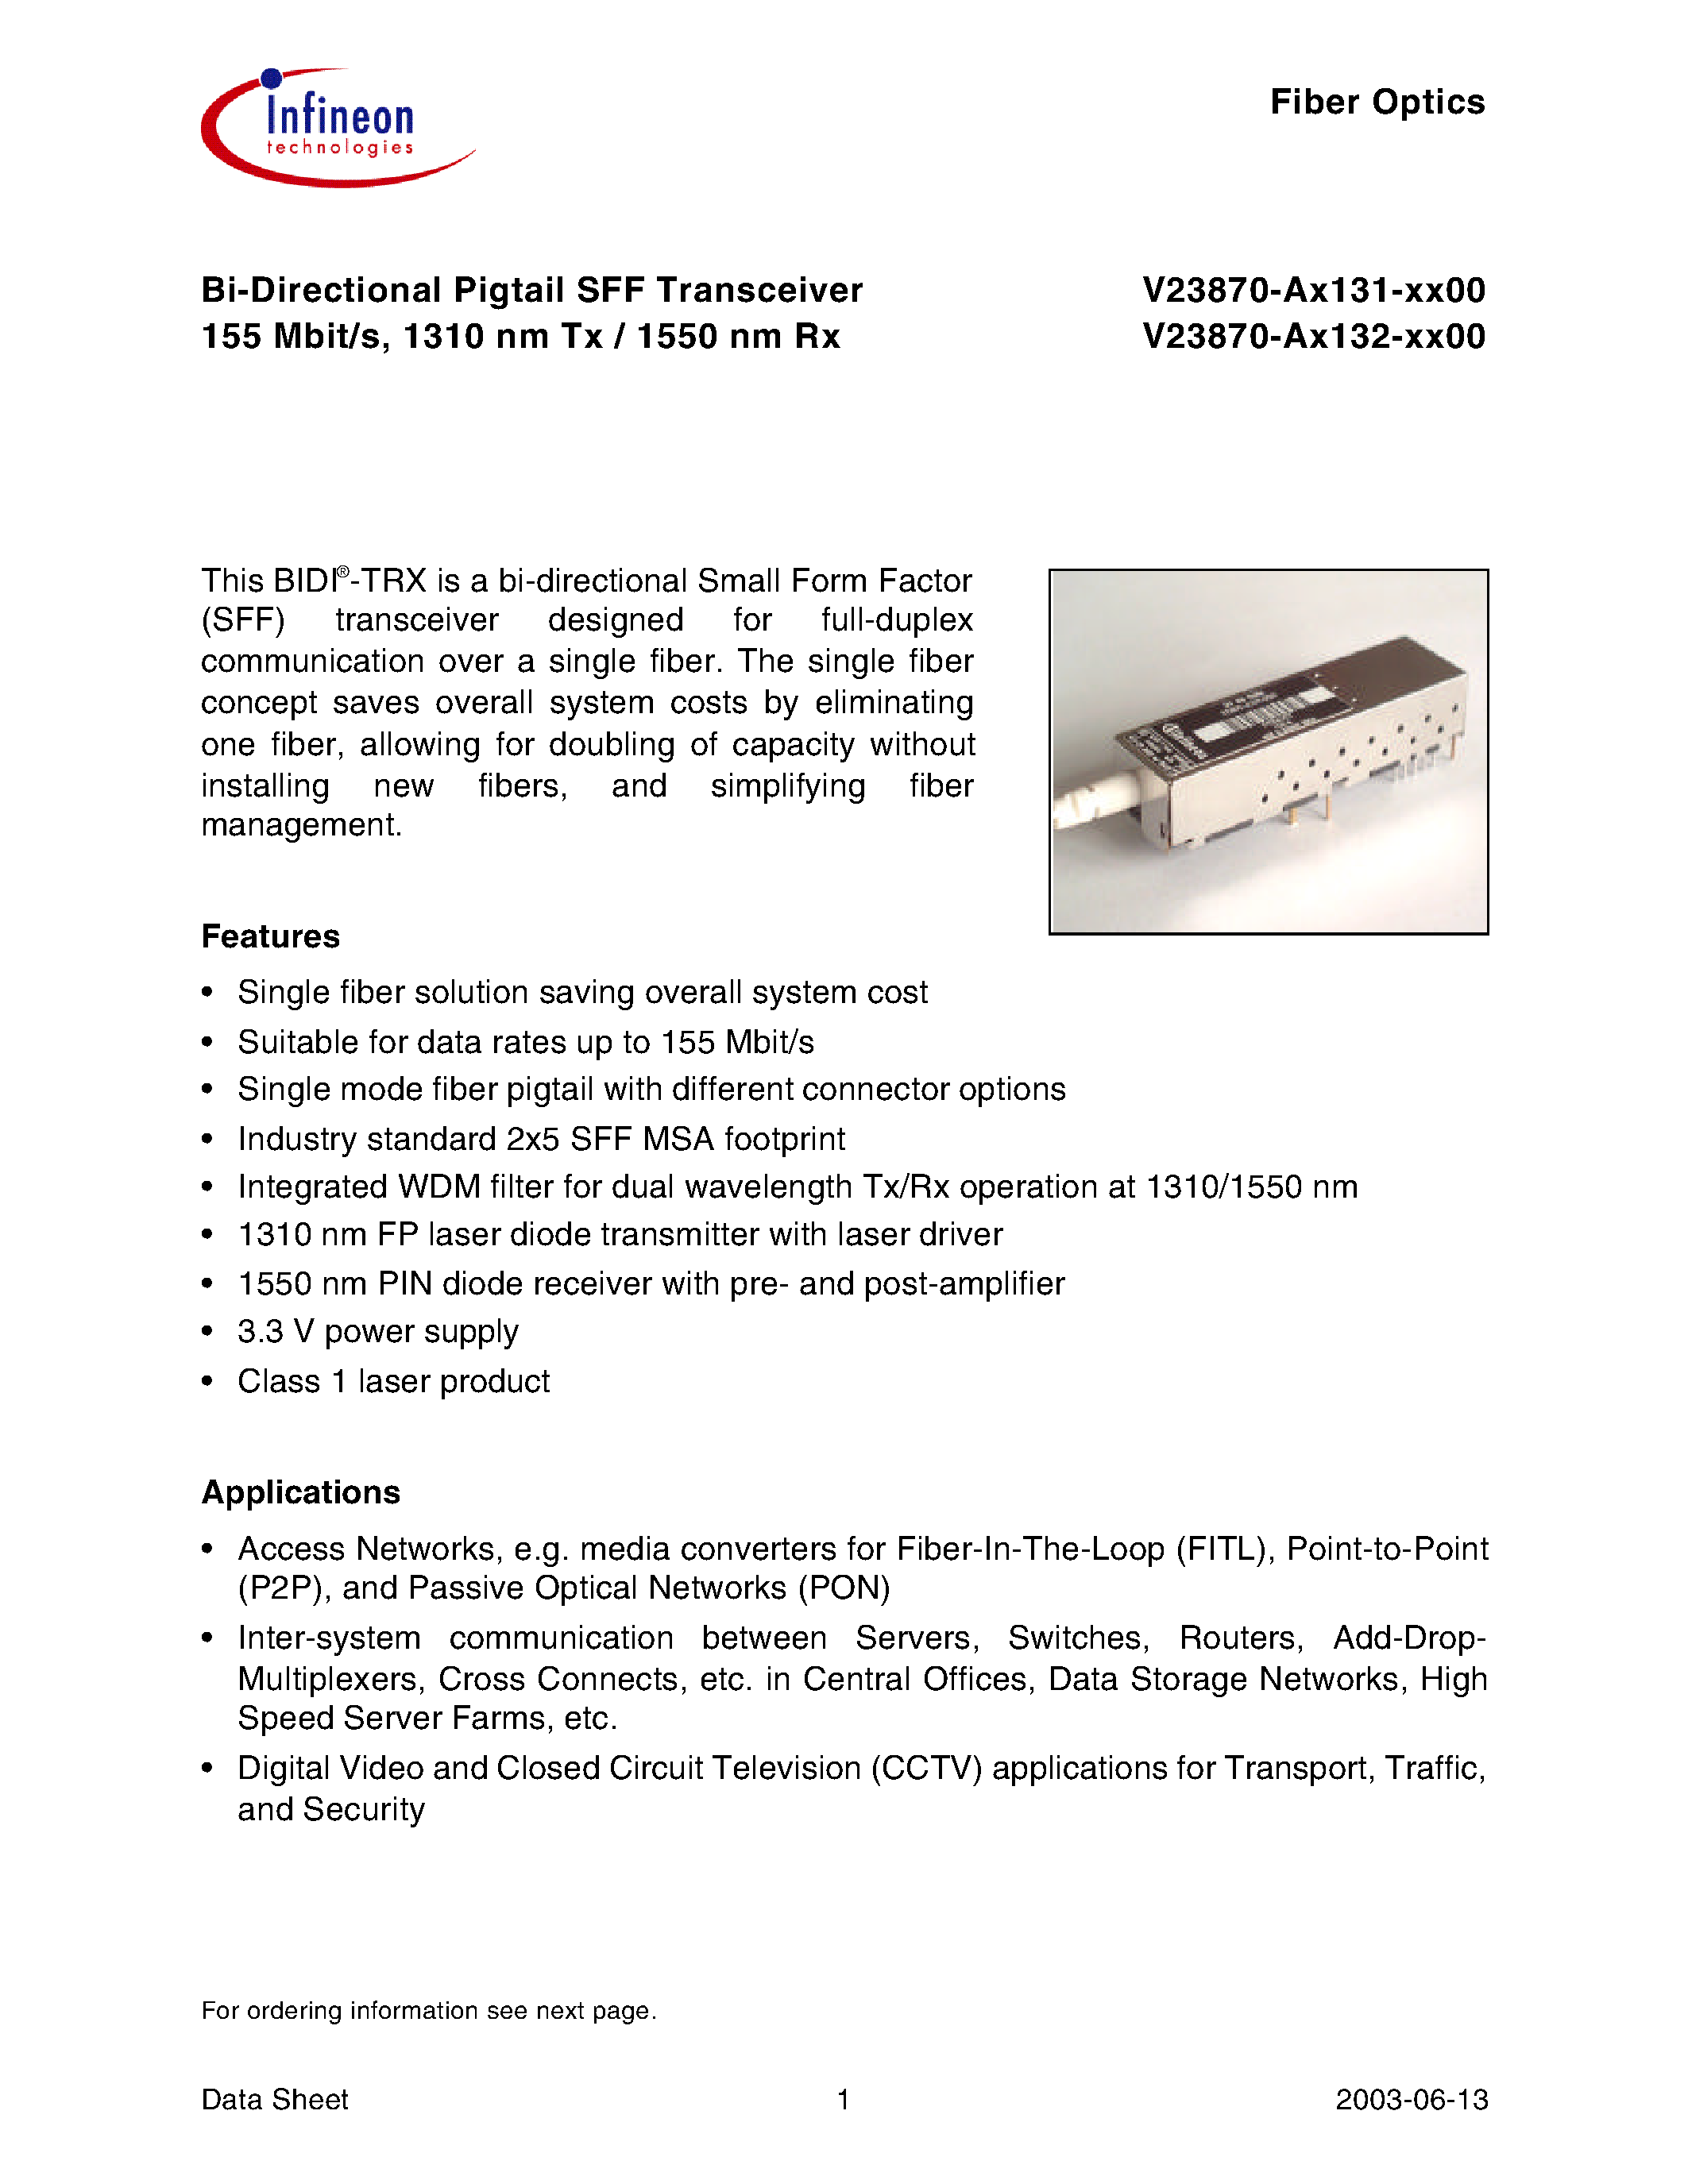 Datasheet V23870-A3131-F600 - Bi-Directional Pigtail SFF Transceiver 155 Mbit/s/ 1310 nm Tx / 1550 nm Rx page 1